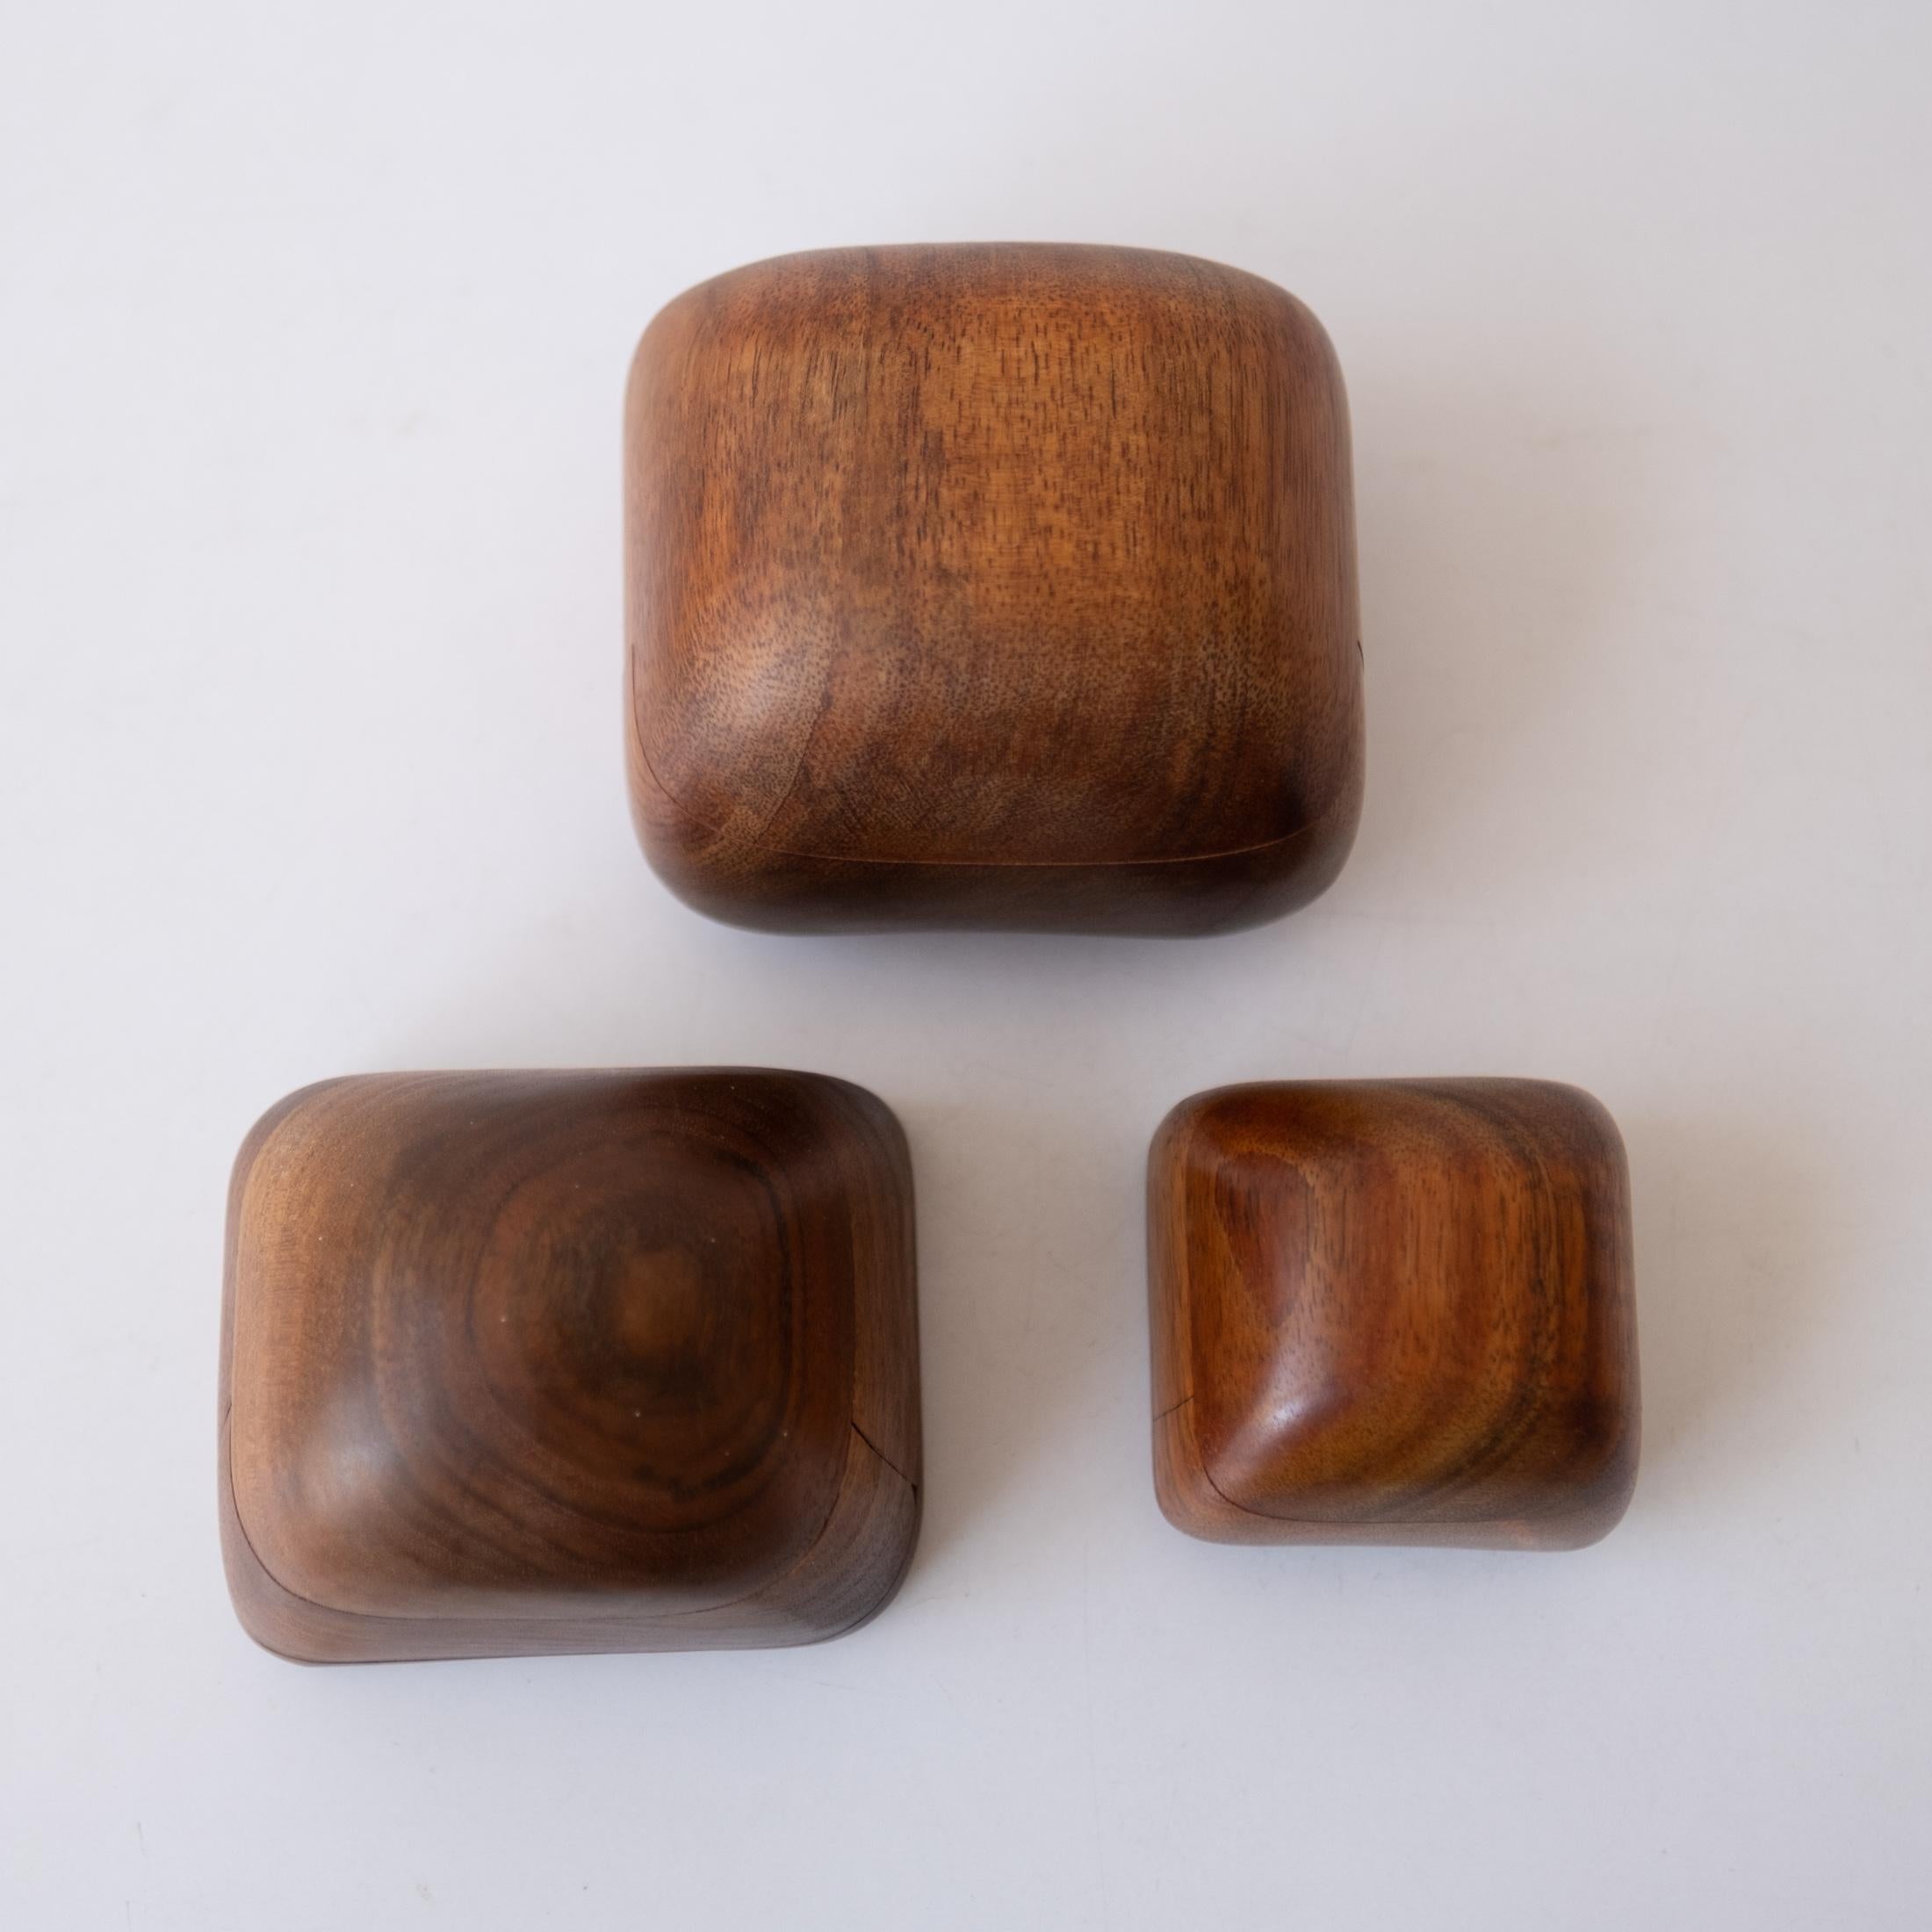 Studio Handcrafted Wood Jewelry Boxes by Dean Santner, 1970s For Sale 6